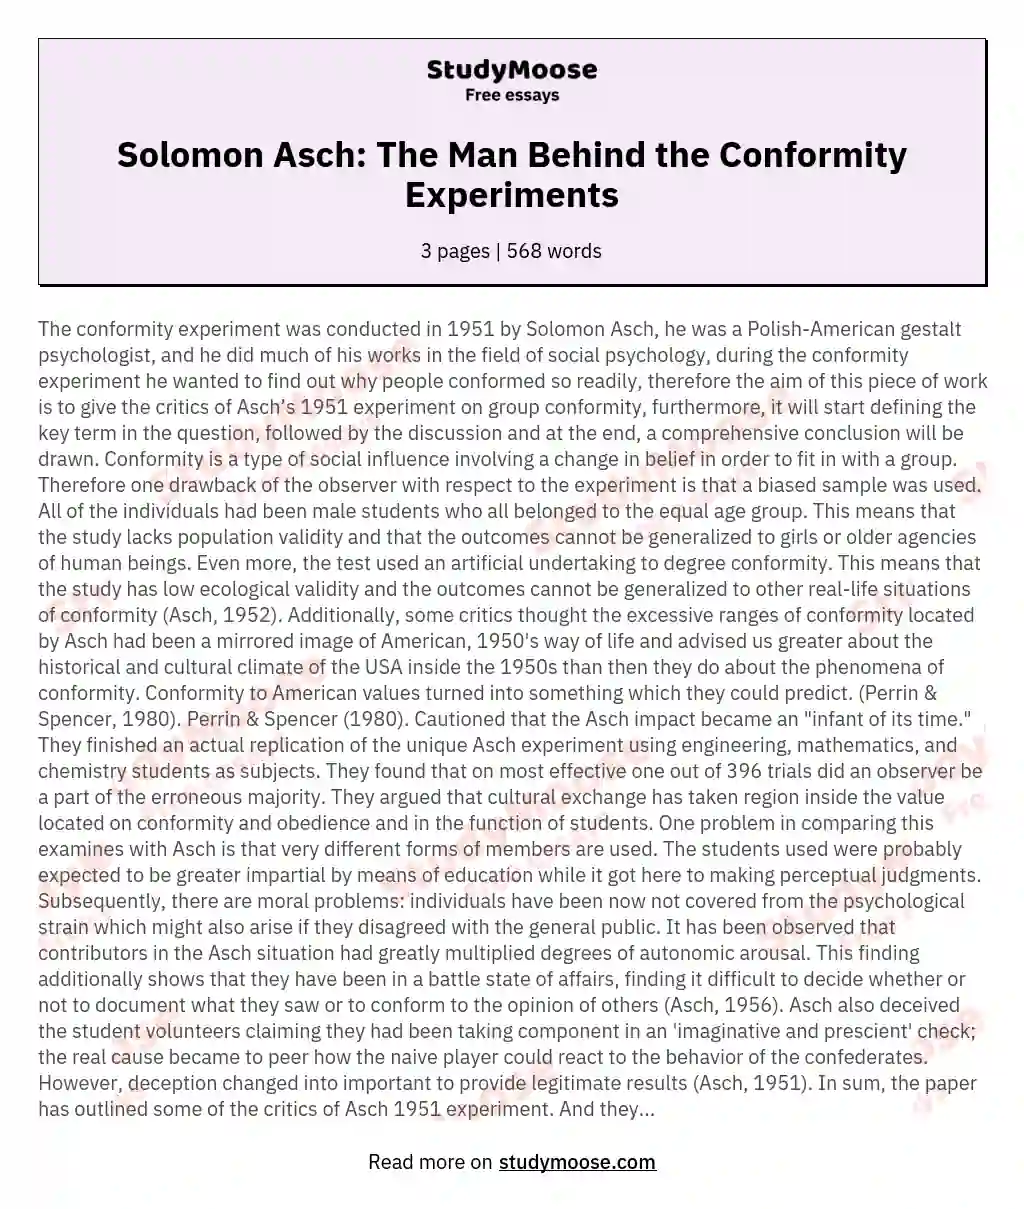 Solomon Asch: The Man Behind the Conformity Experiments